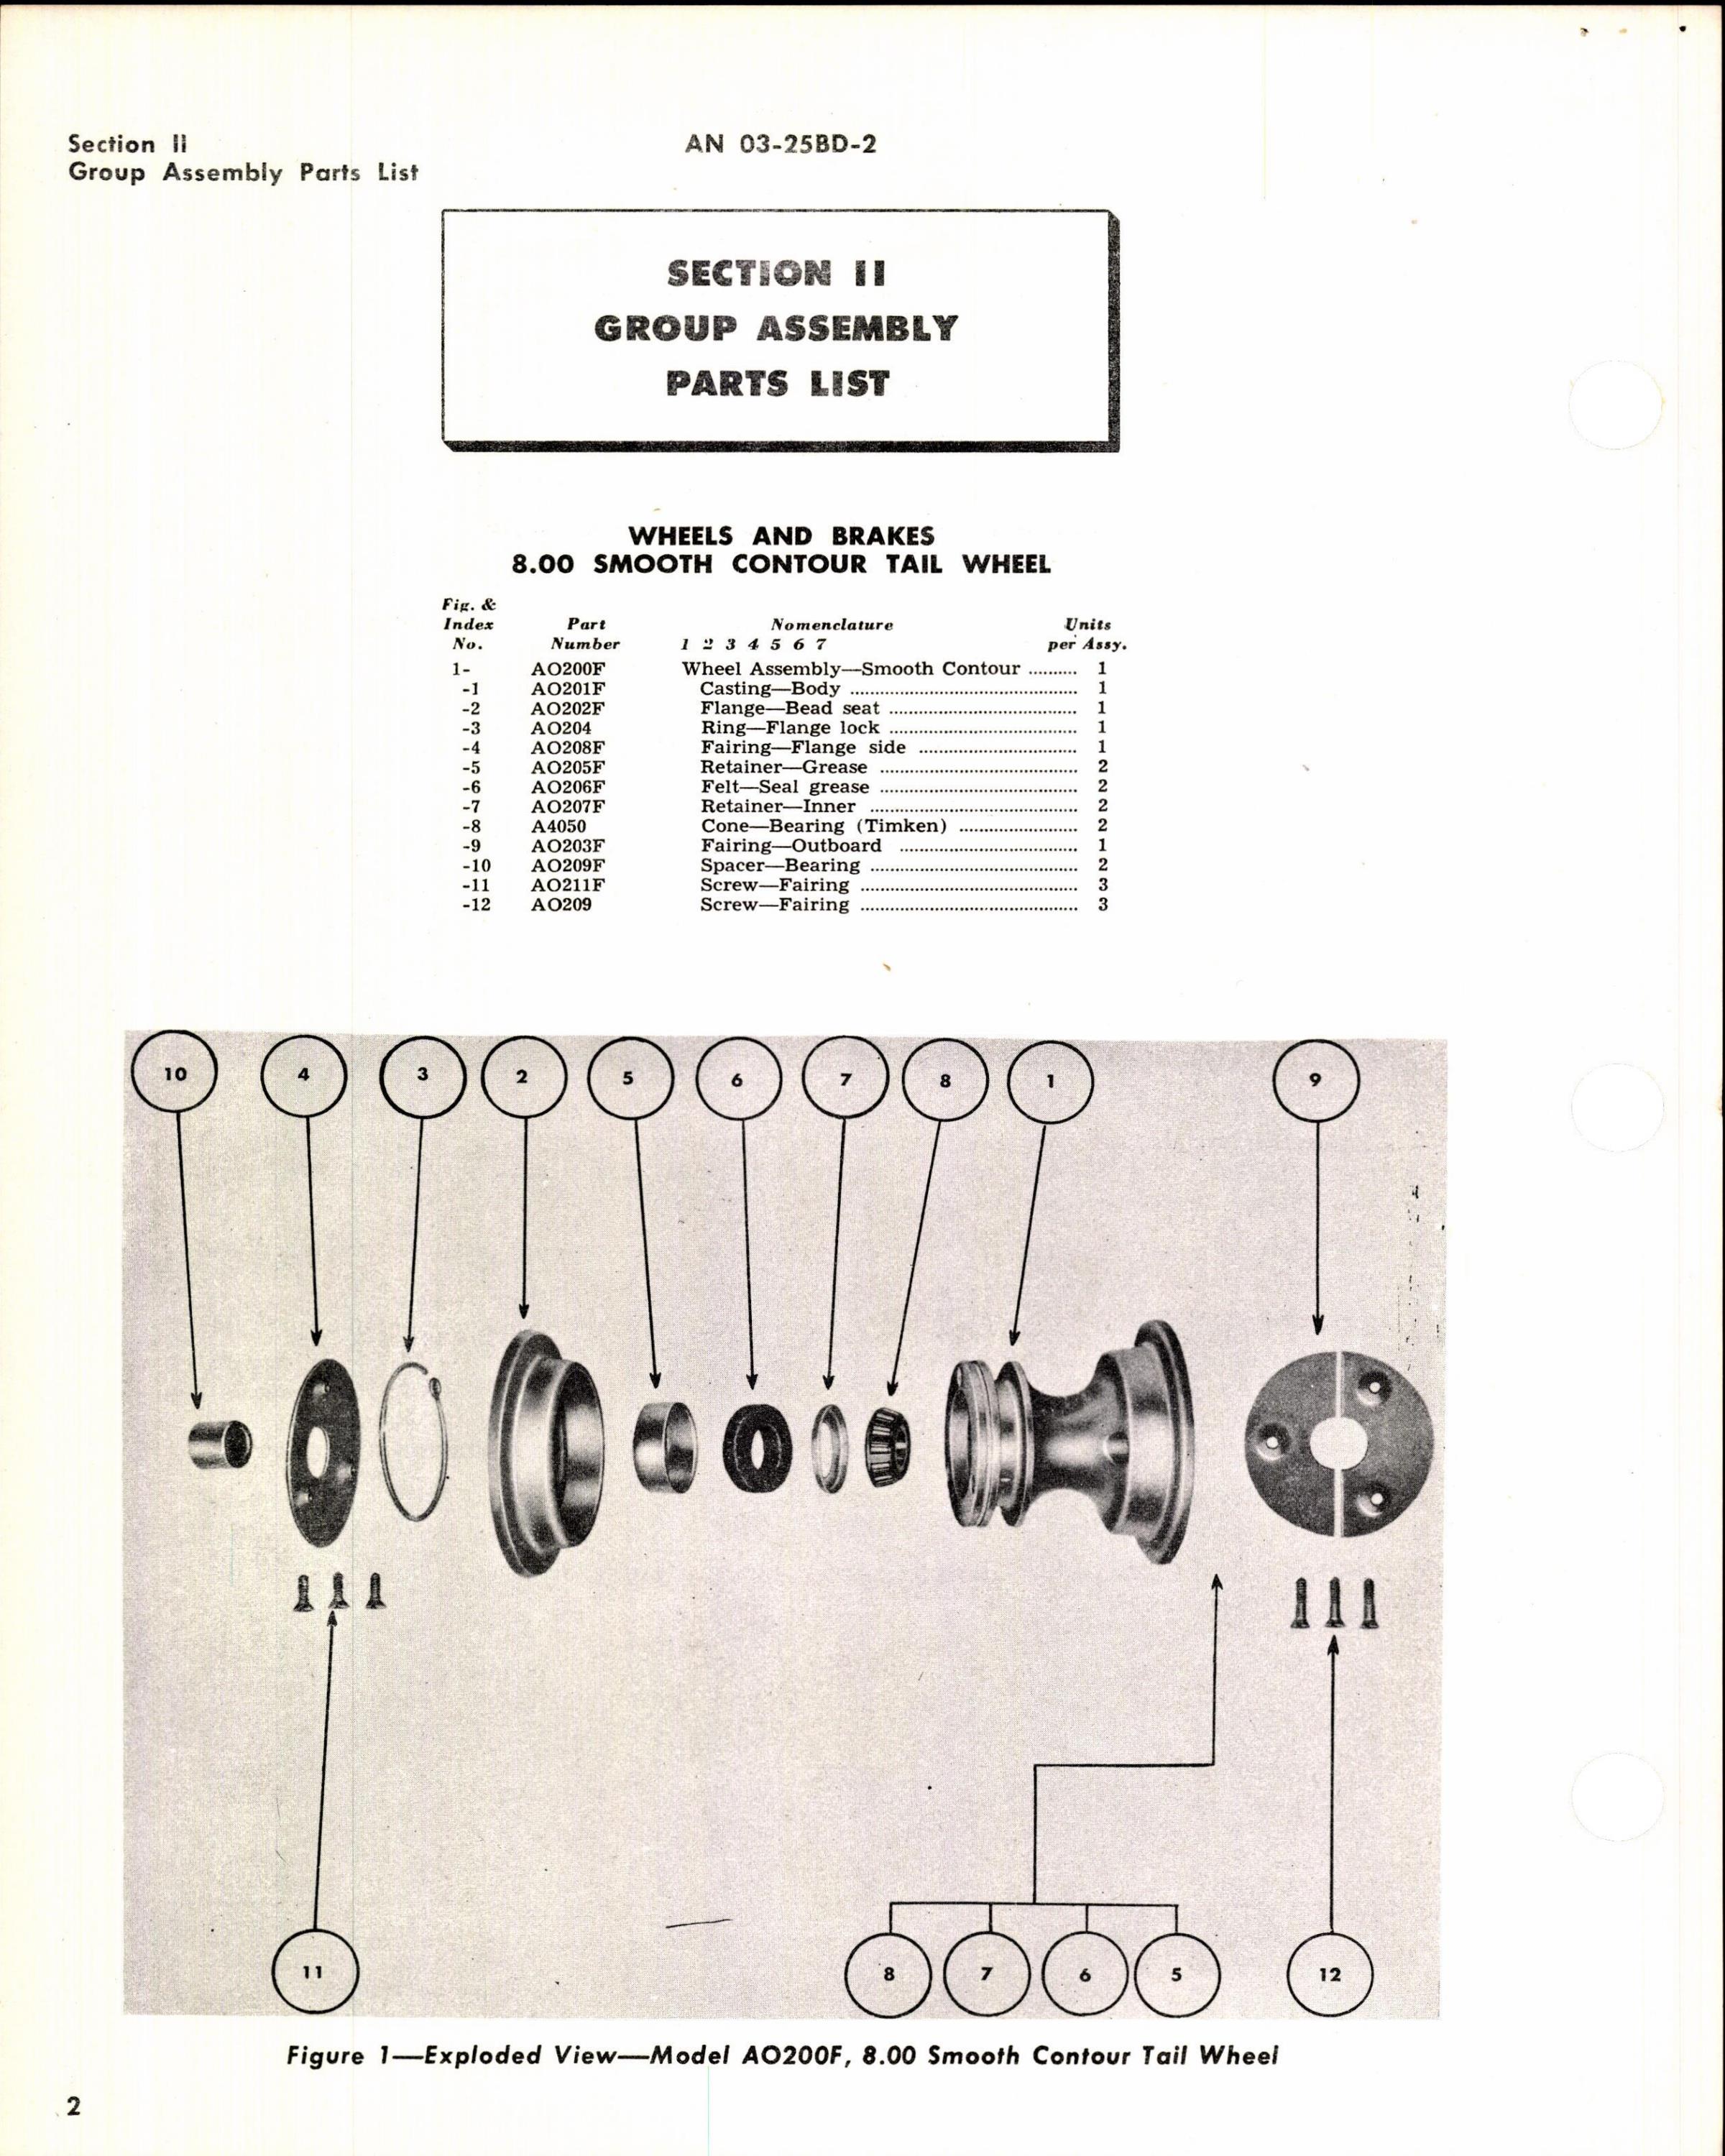 Sample page 4 from AirCorps Library document: Parts Catalog for Firestone Tail Wheels